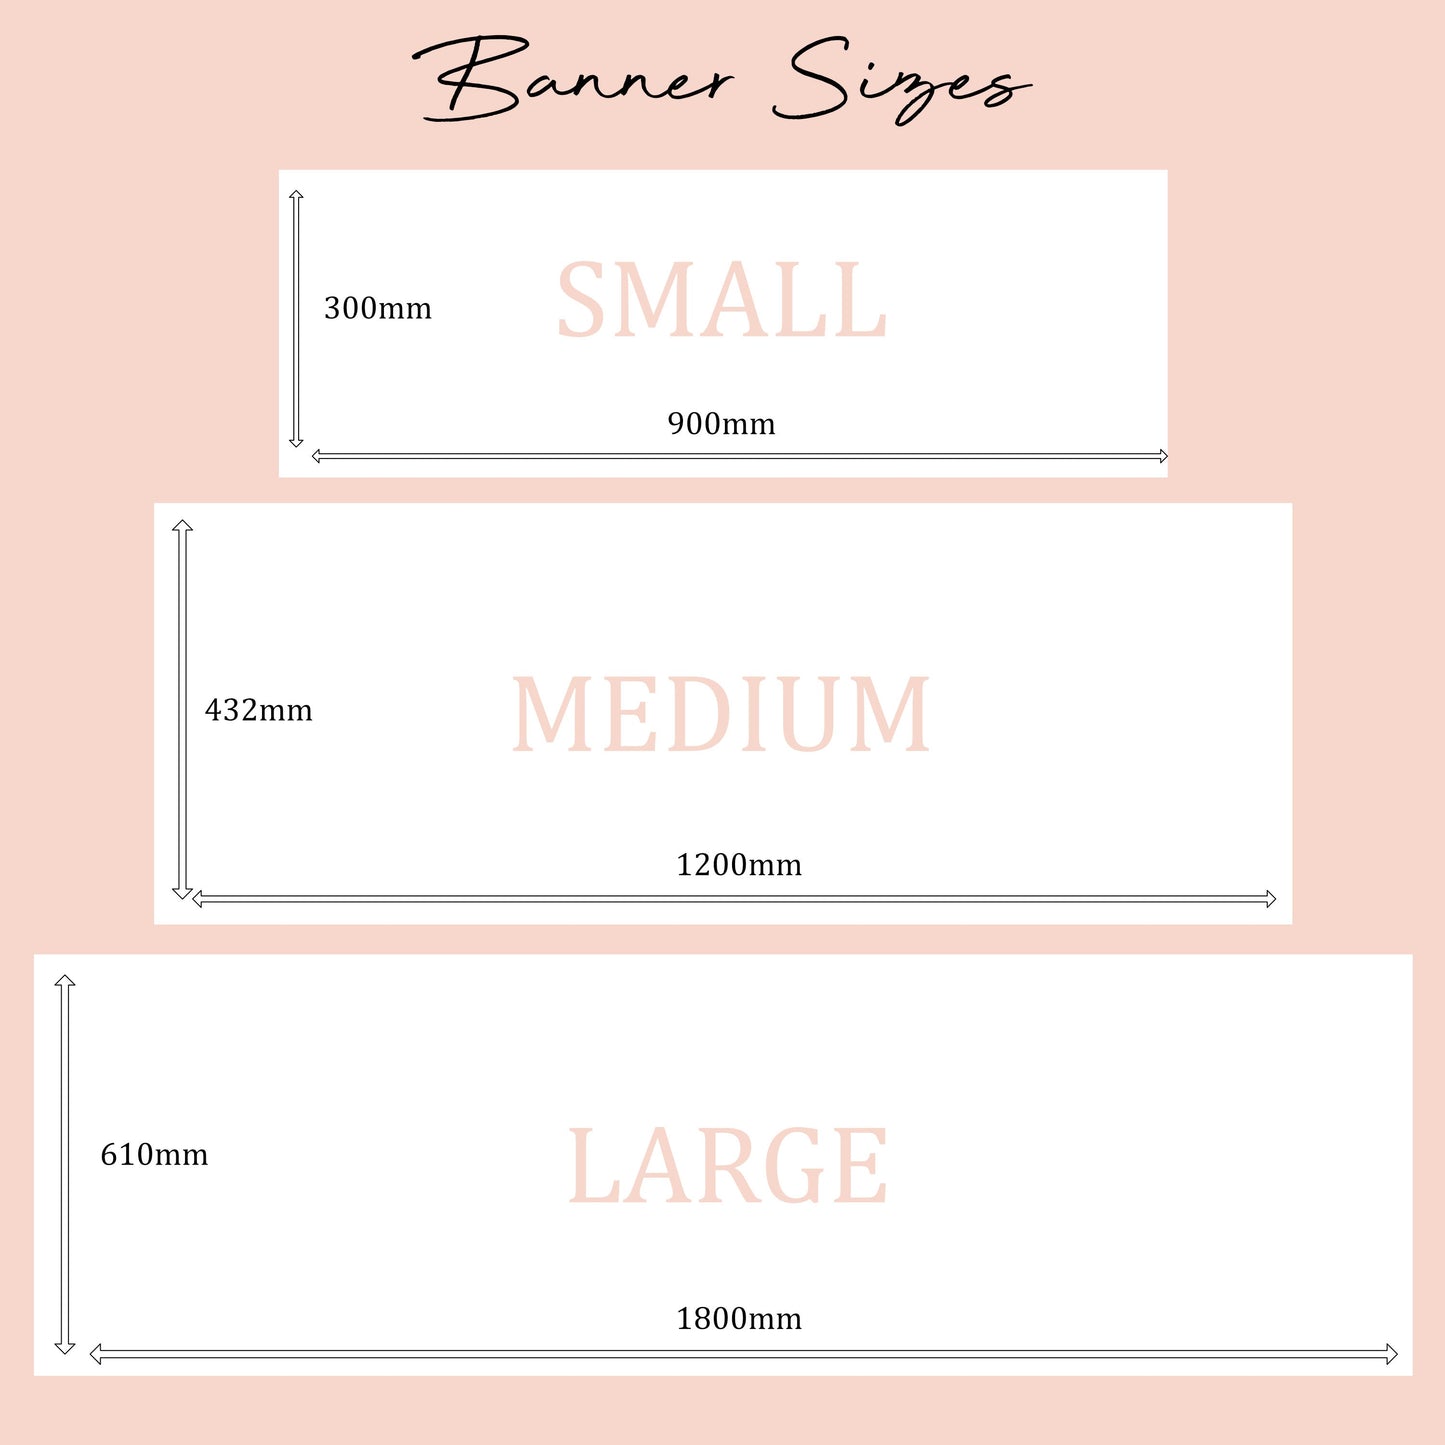 Personalised Birthday Party Banner Lilac Stars